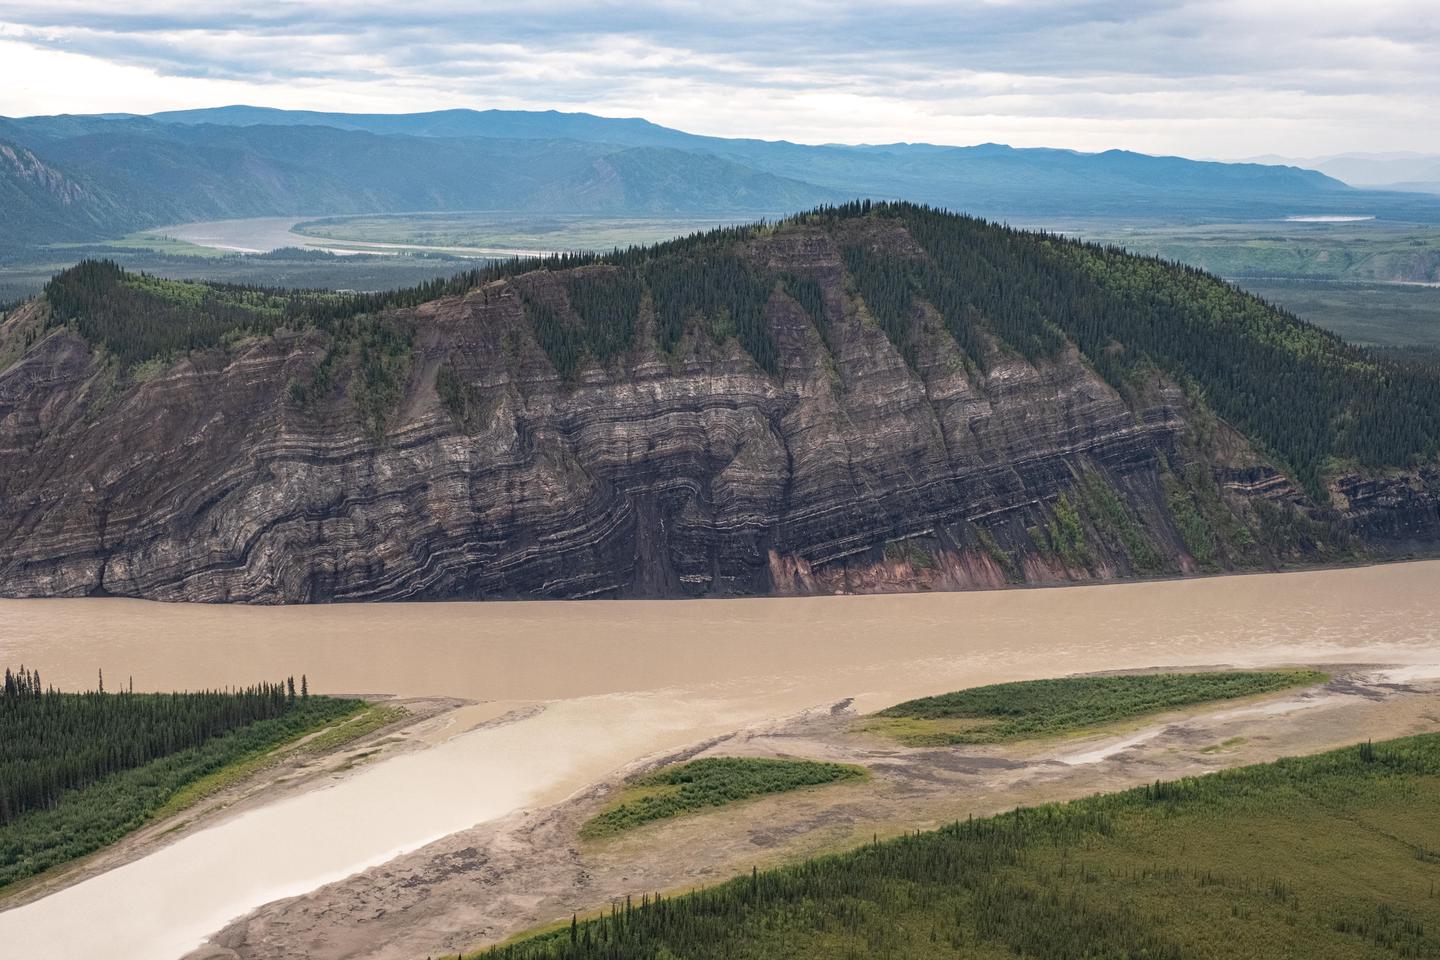 Calico Bluff and the Yukon RiverCalico Bluff, showing 4 million years of rock layers, rises above the Yukon River and is one of many bluffs along the 130 miles of river in the preserve